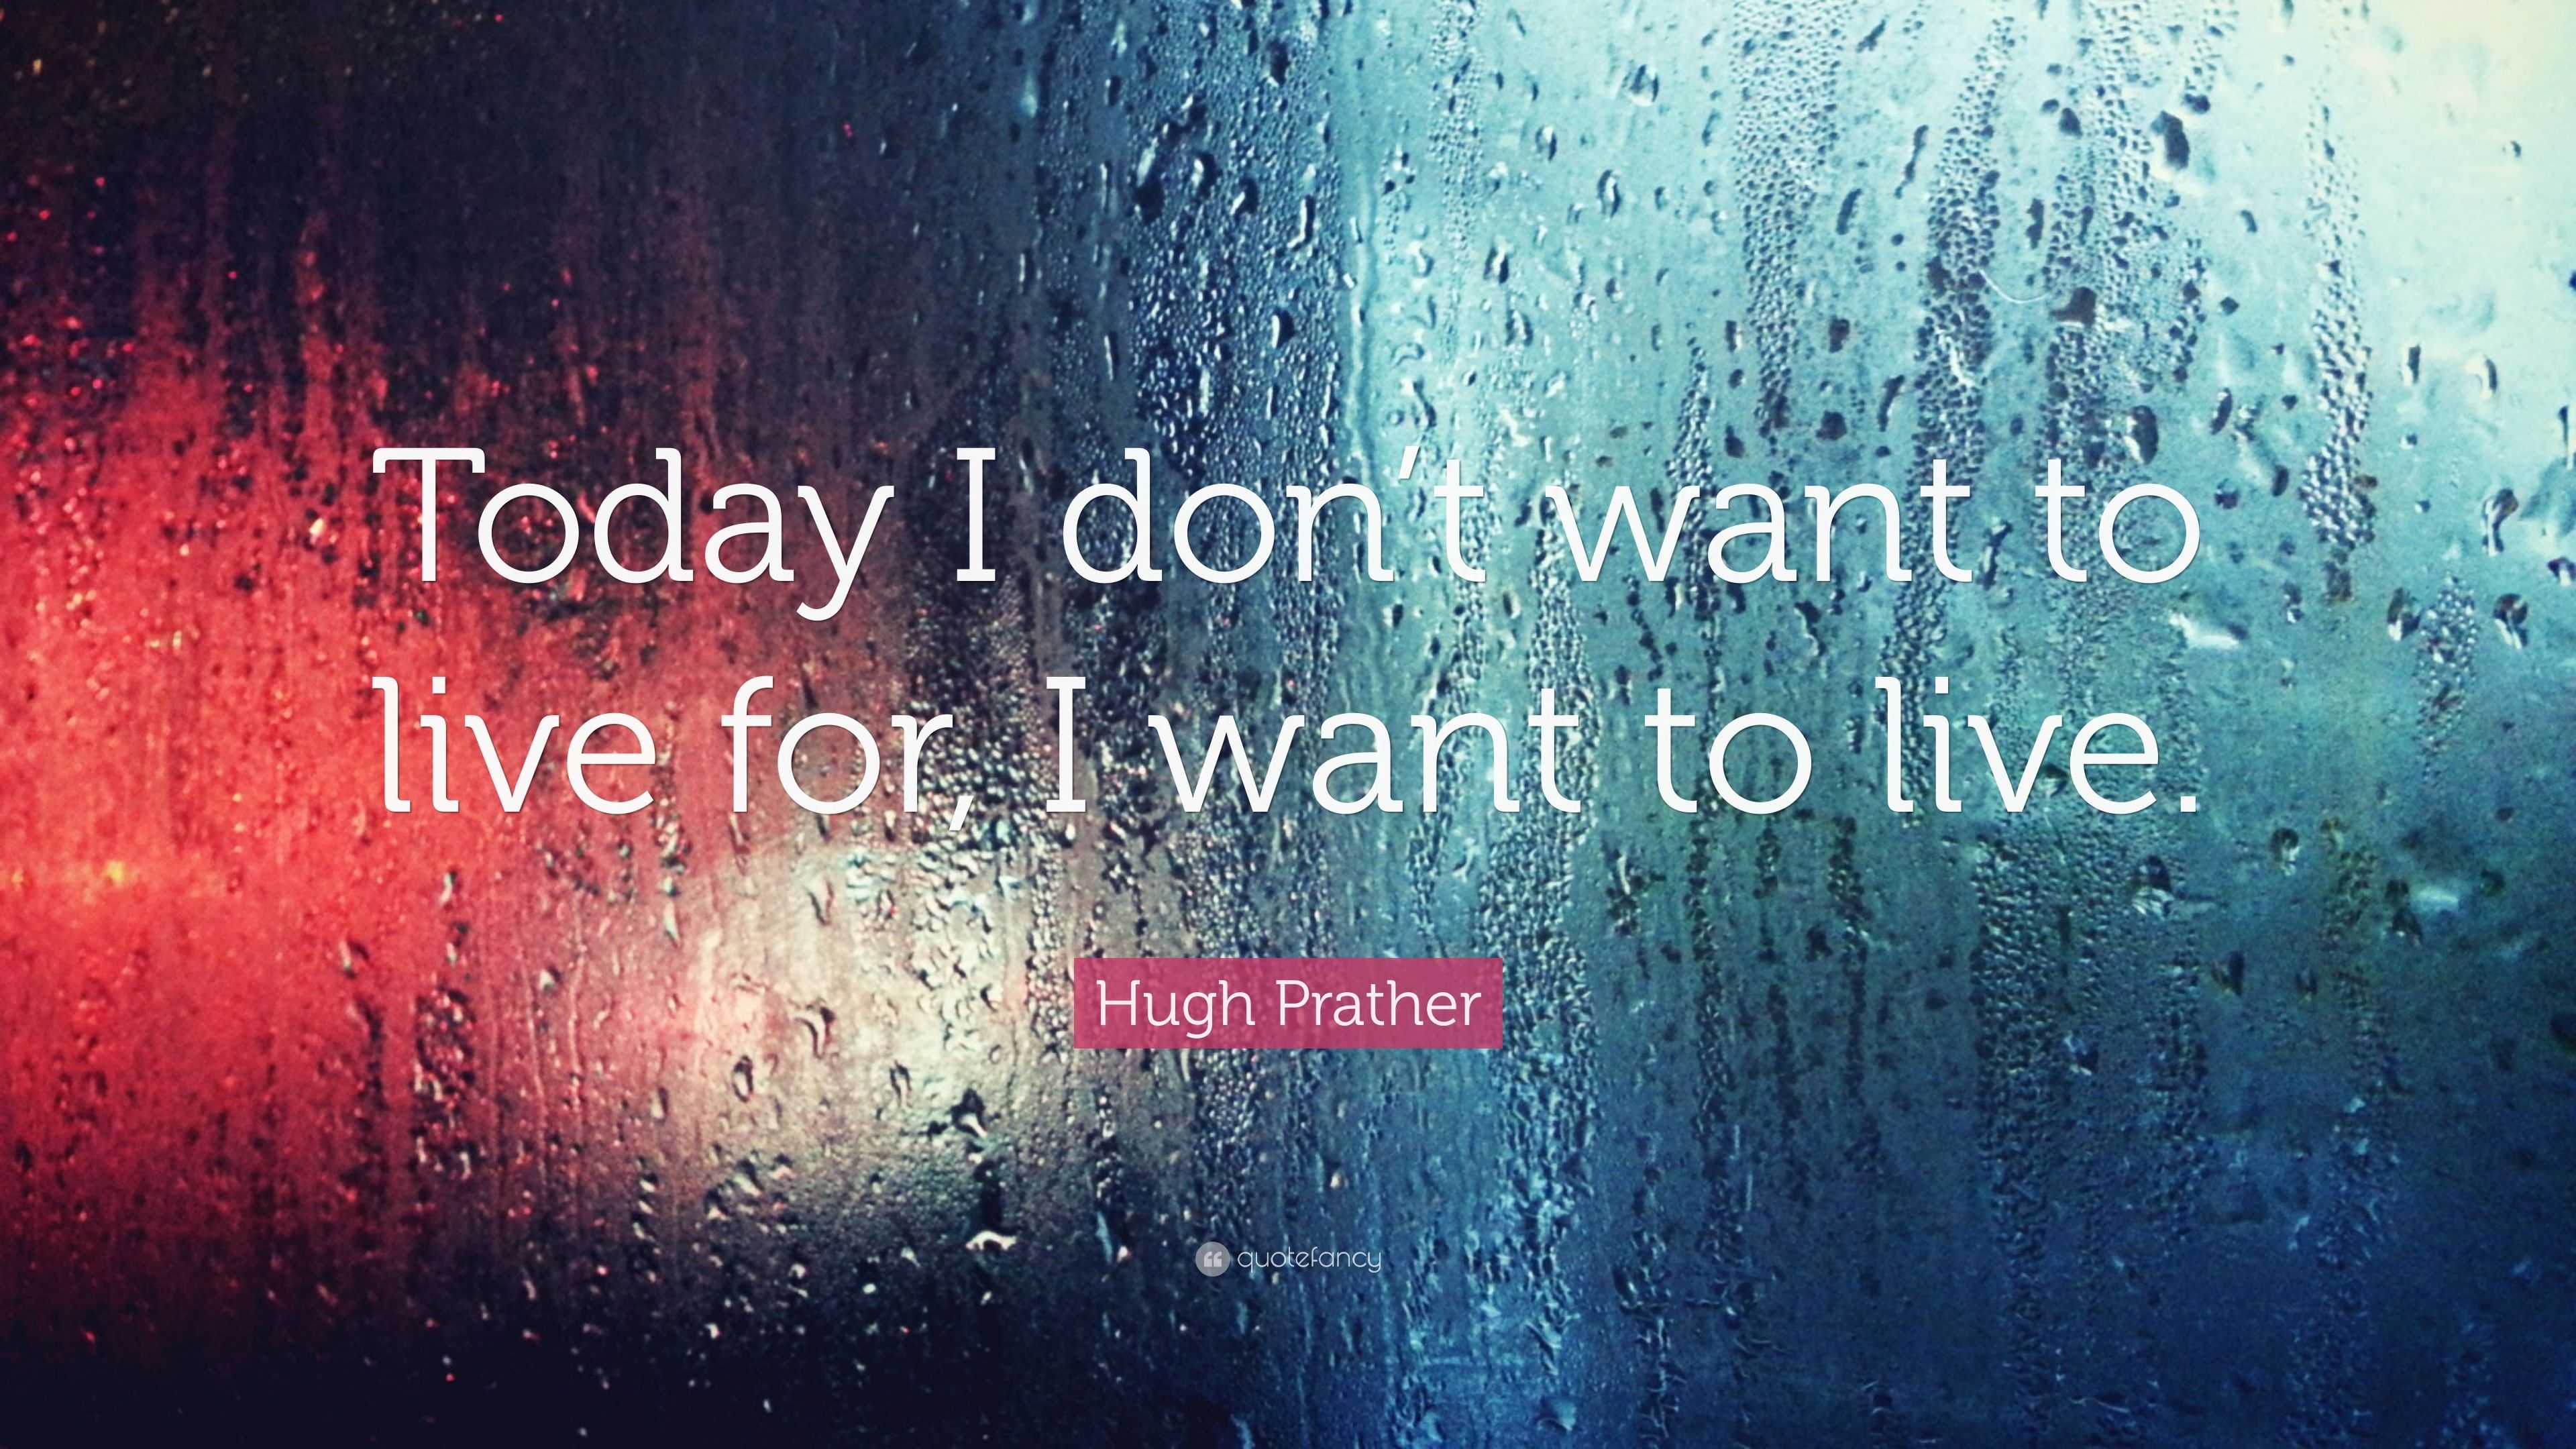 Hugh Prather Quote “today I Dont Want To Live For I Want To Live ”